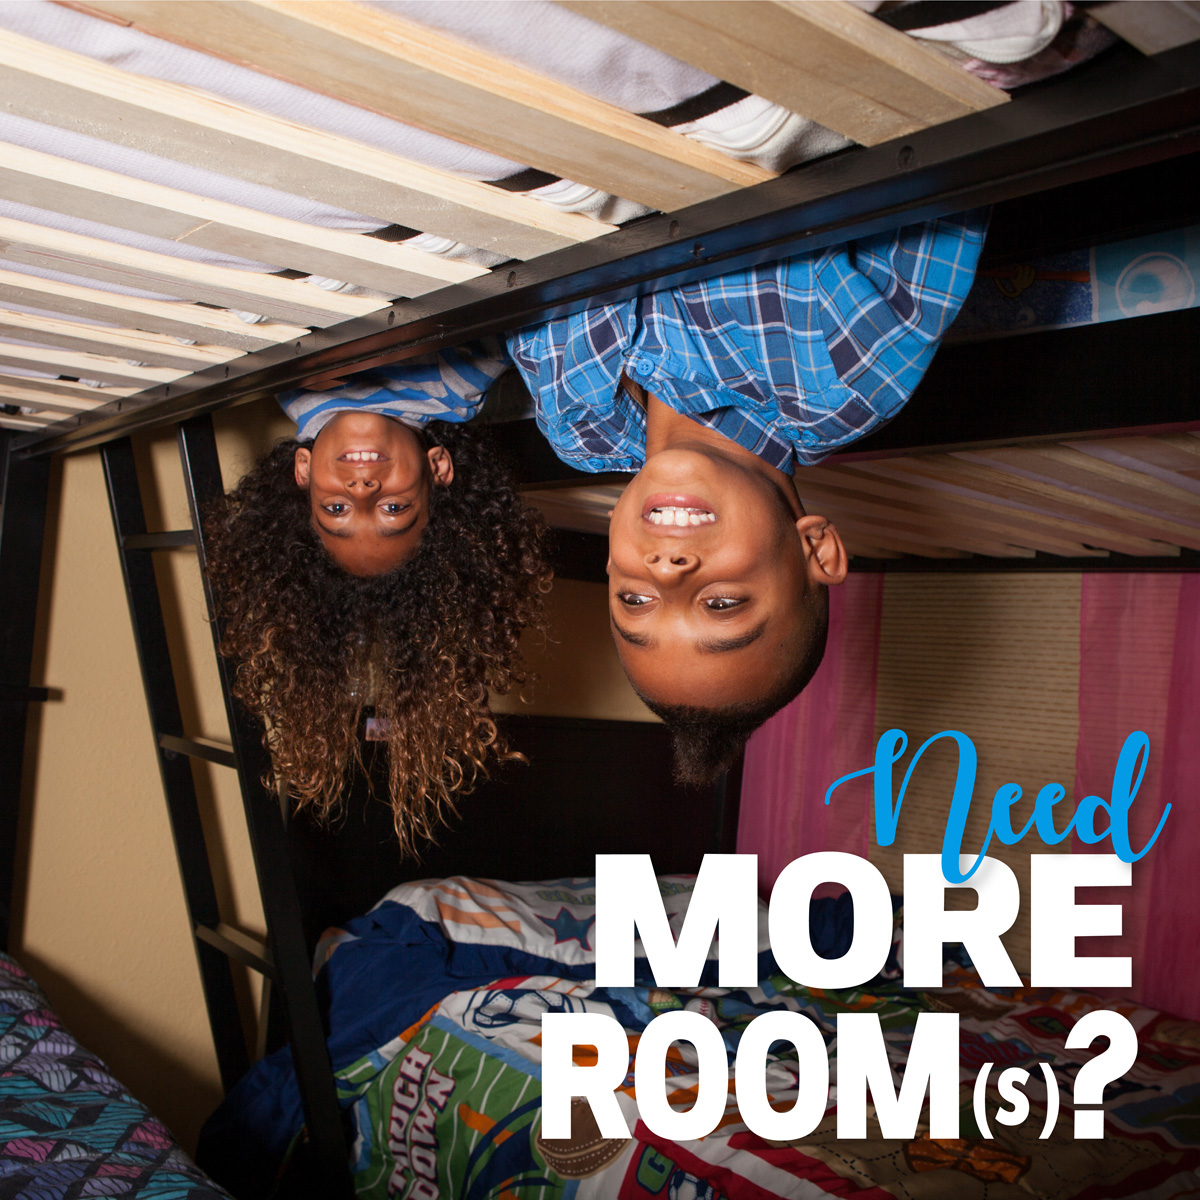 Feeling cramped in your current space? Time to upgrade to a larger home! DM me to discuss how much home you could qualify for and find a more spacious environment for your growing family. #HomeUpgrade #RealEstate #FamilyLiving